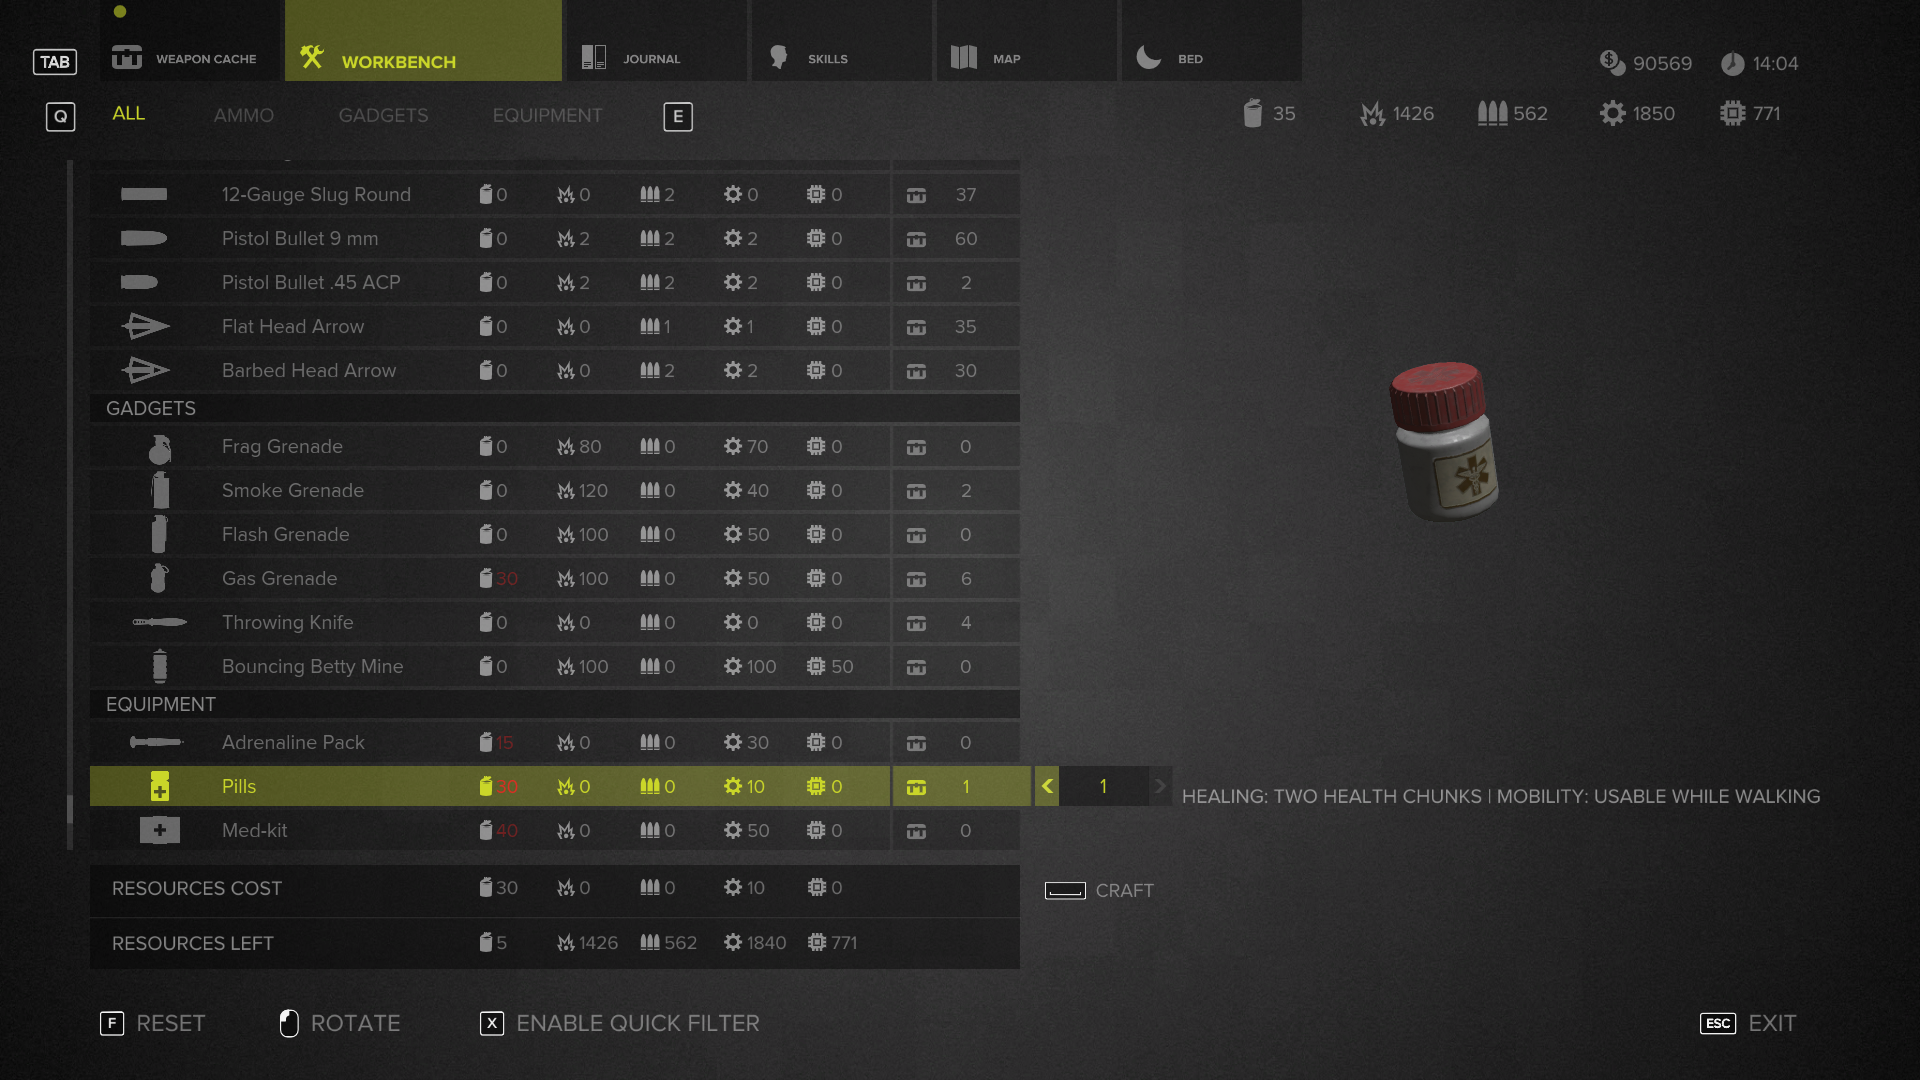 Magic Bullet Pudding Redefining Resource Management In Sniper Ghost Warrior 3 News Mod Db